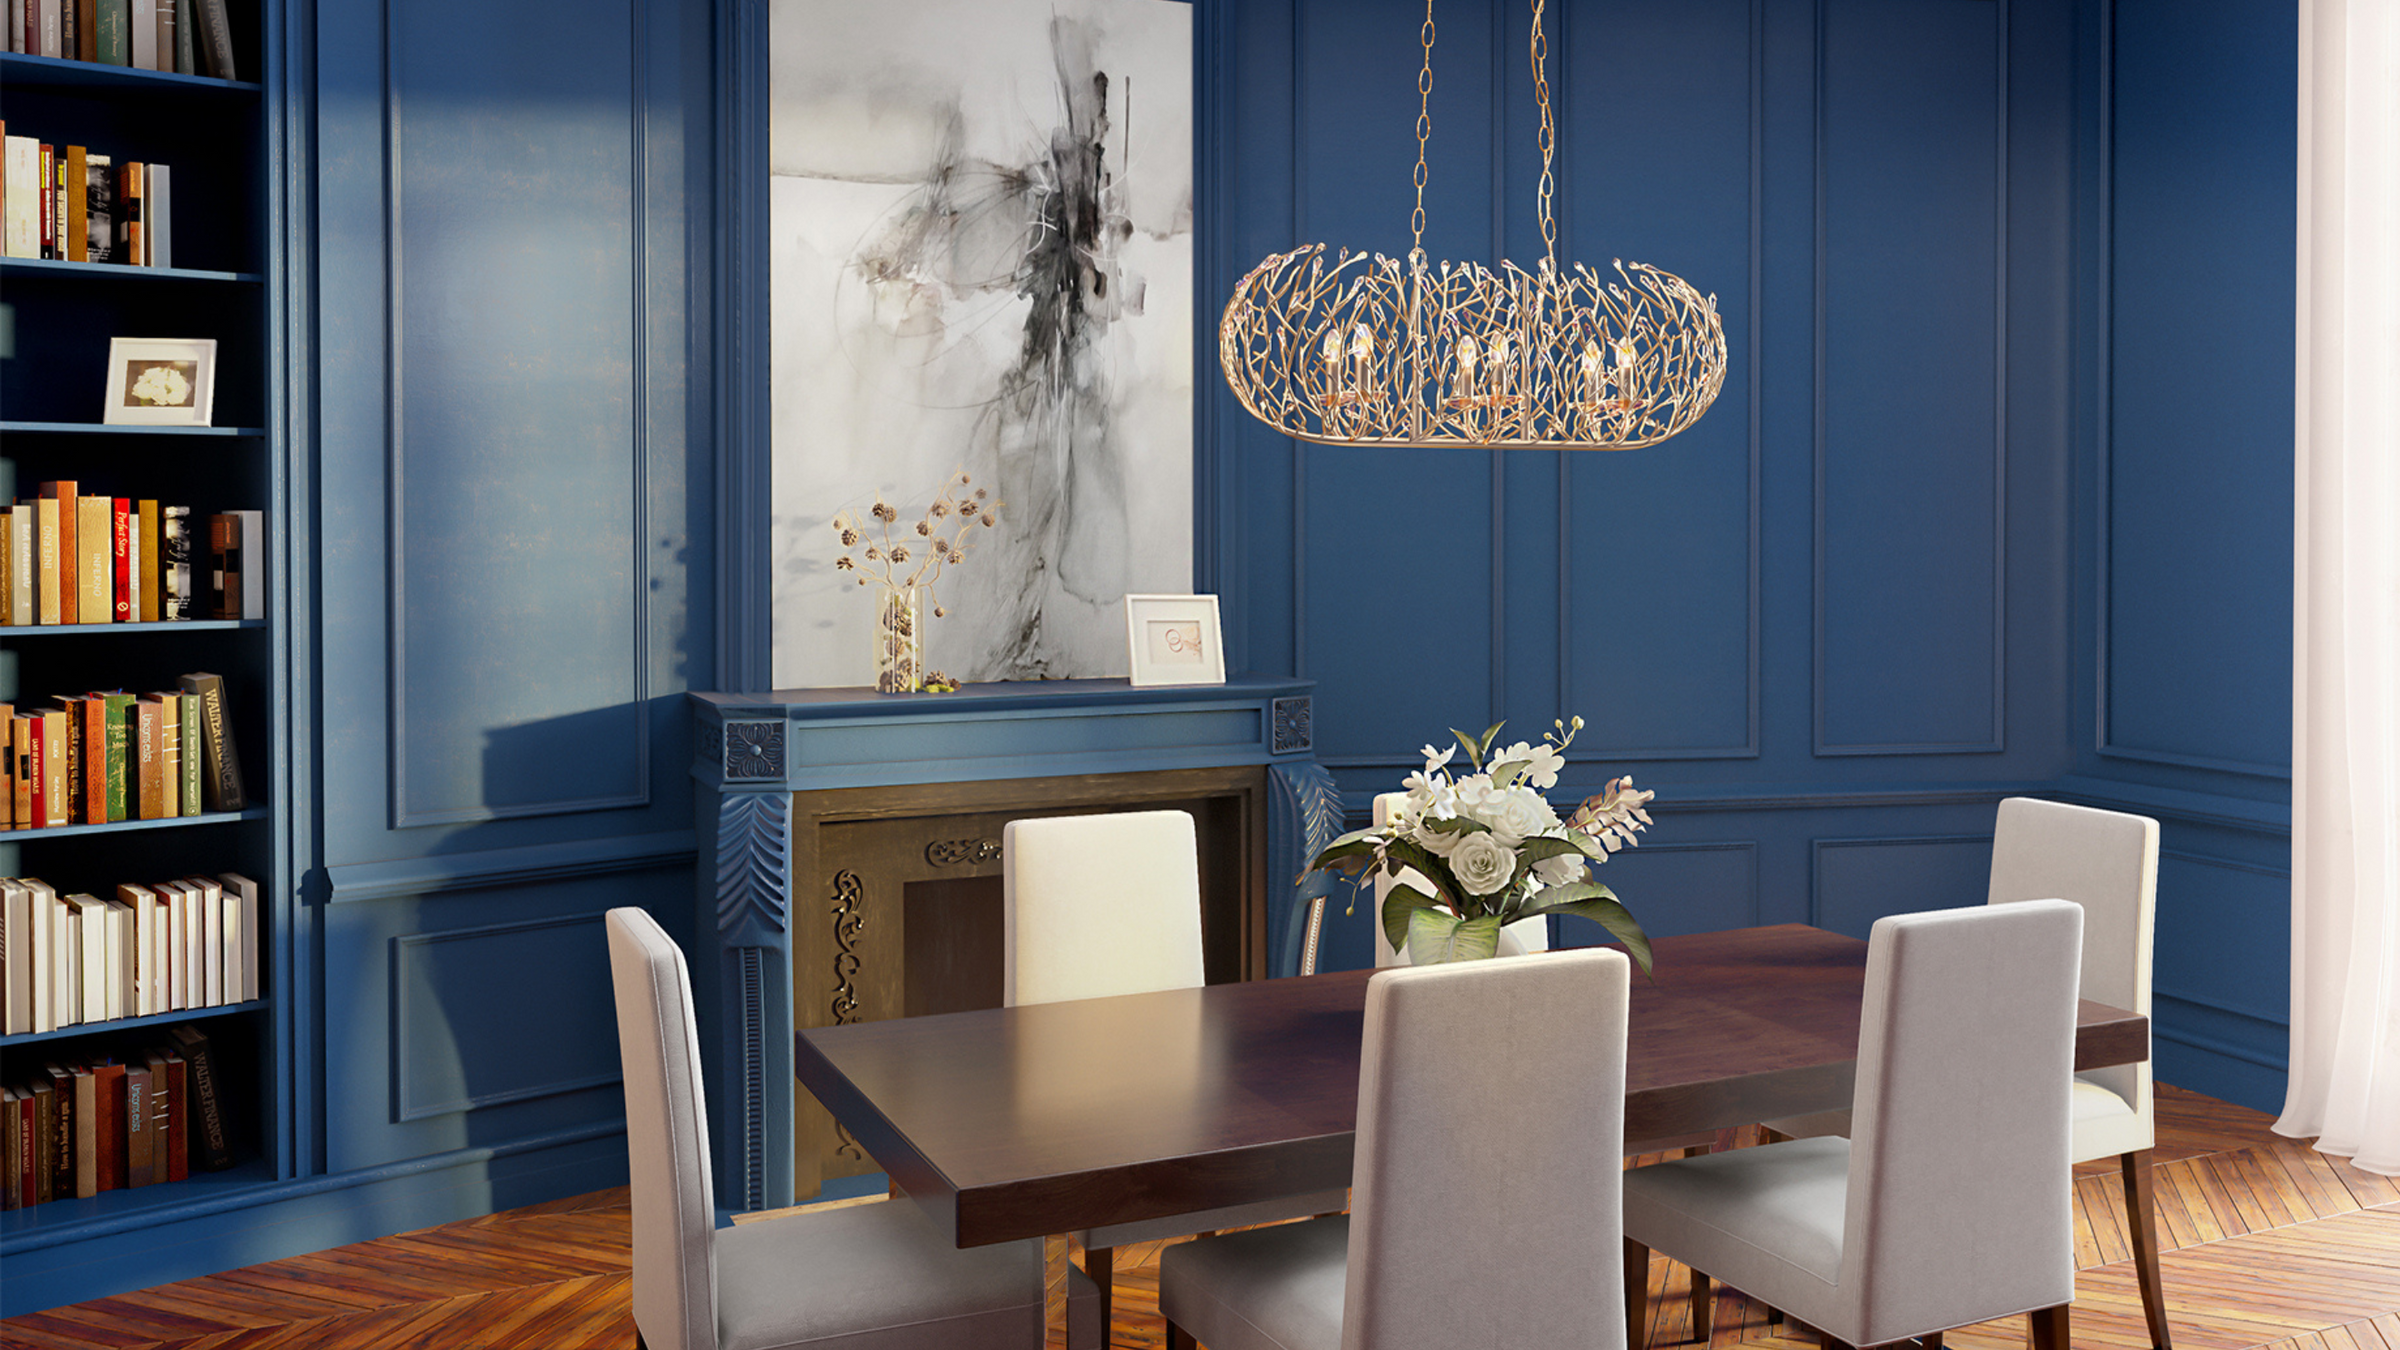 Bask crystal kitchen island pendant shown over dining table in a blue paneled room